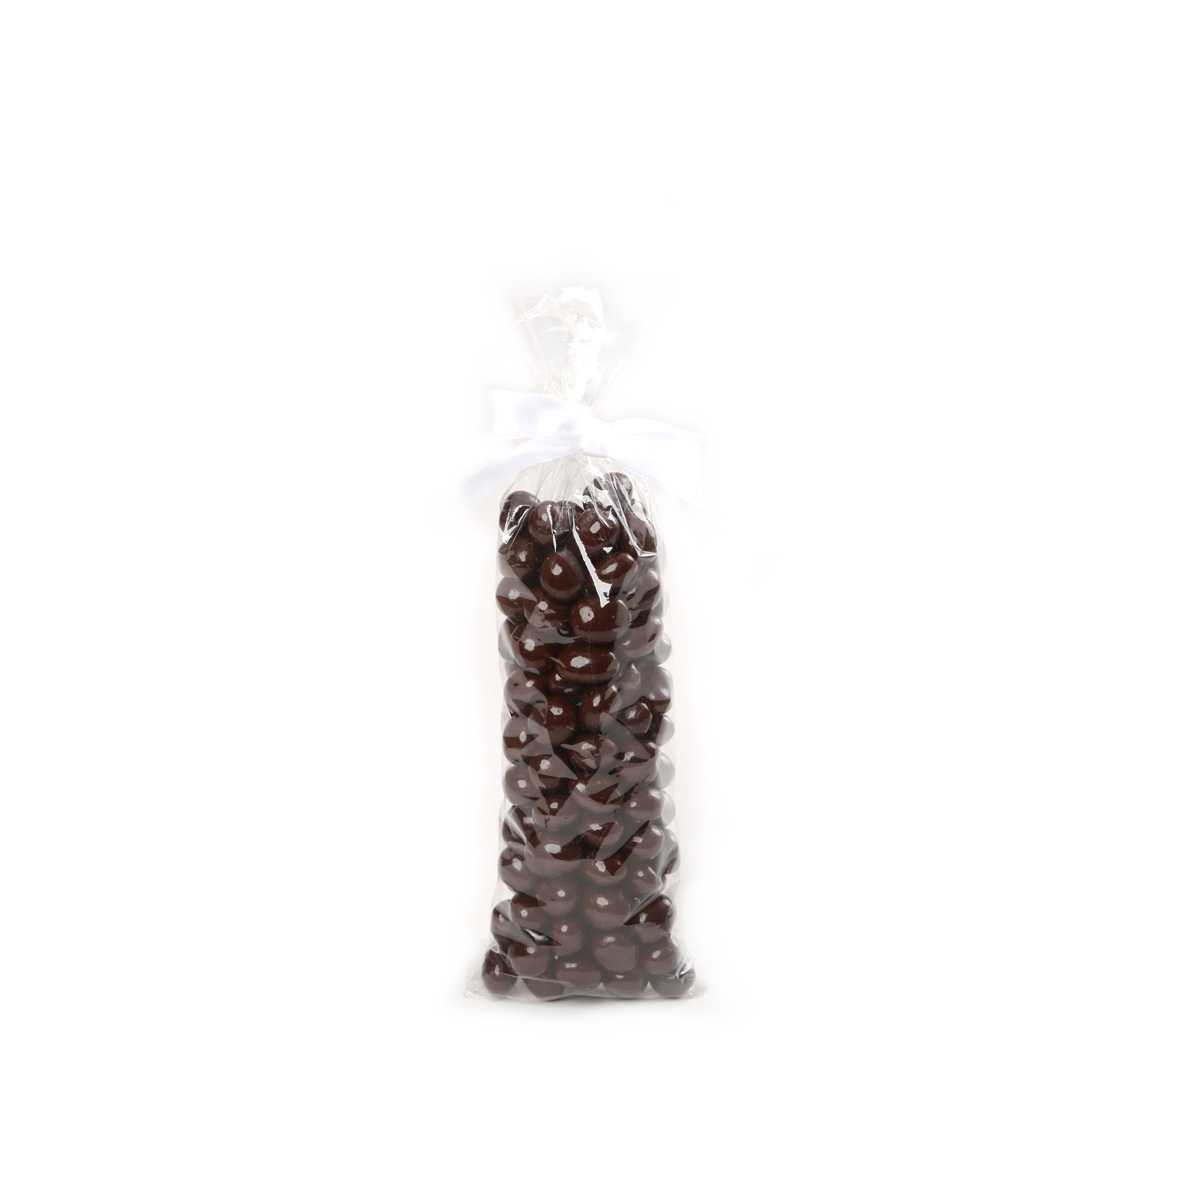 8oz Chocolate Covered Almonds in cello bag